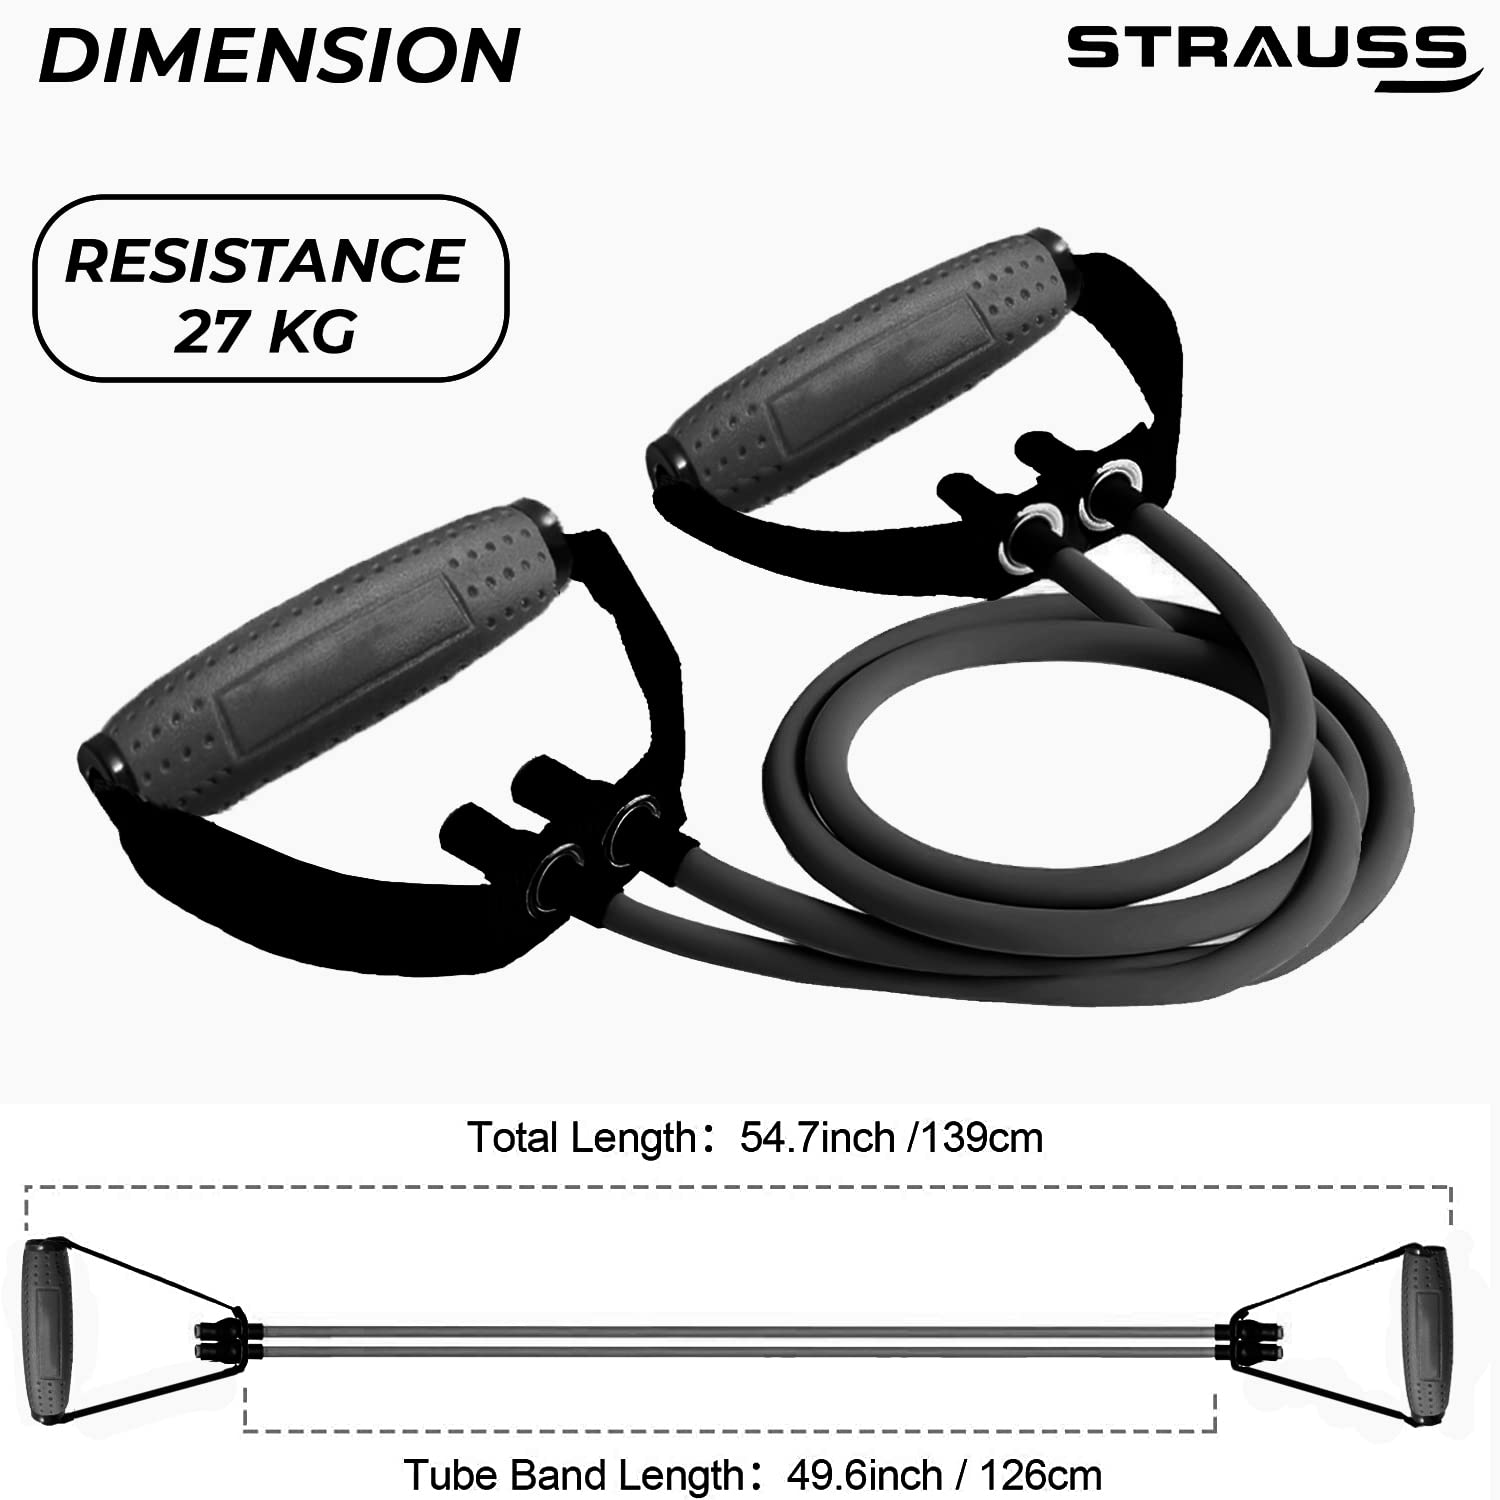 Strauss Double Resistance Tube with PVC Handles, Door Knob & Carry Bag, 27 Kg, (Black)